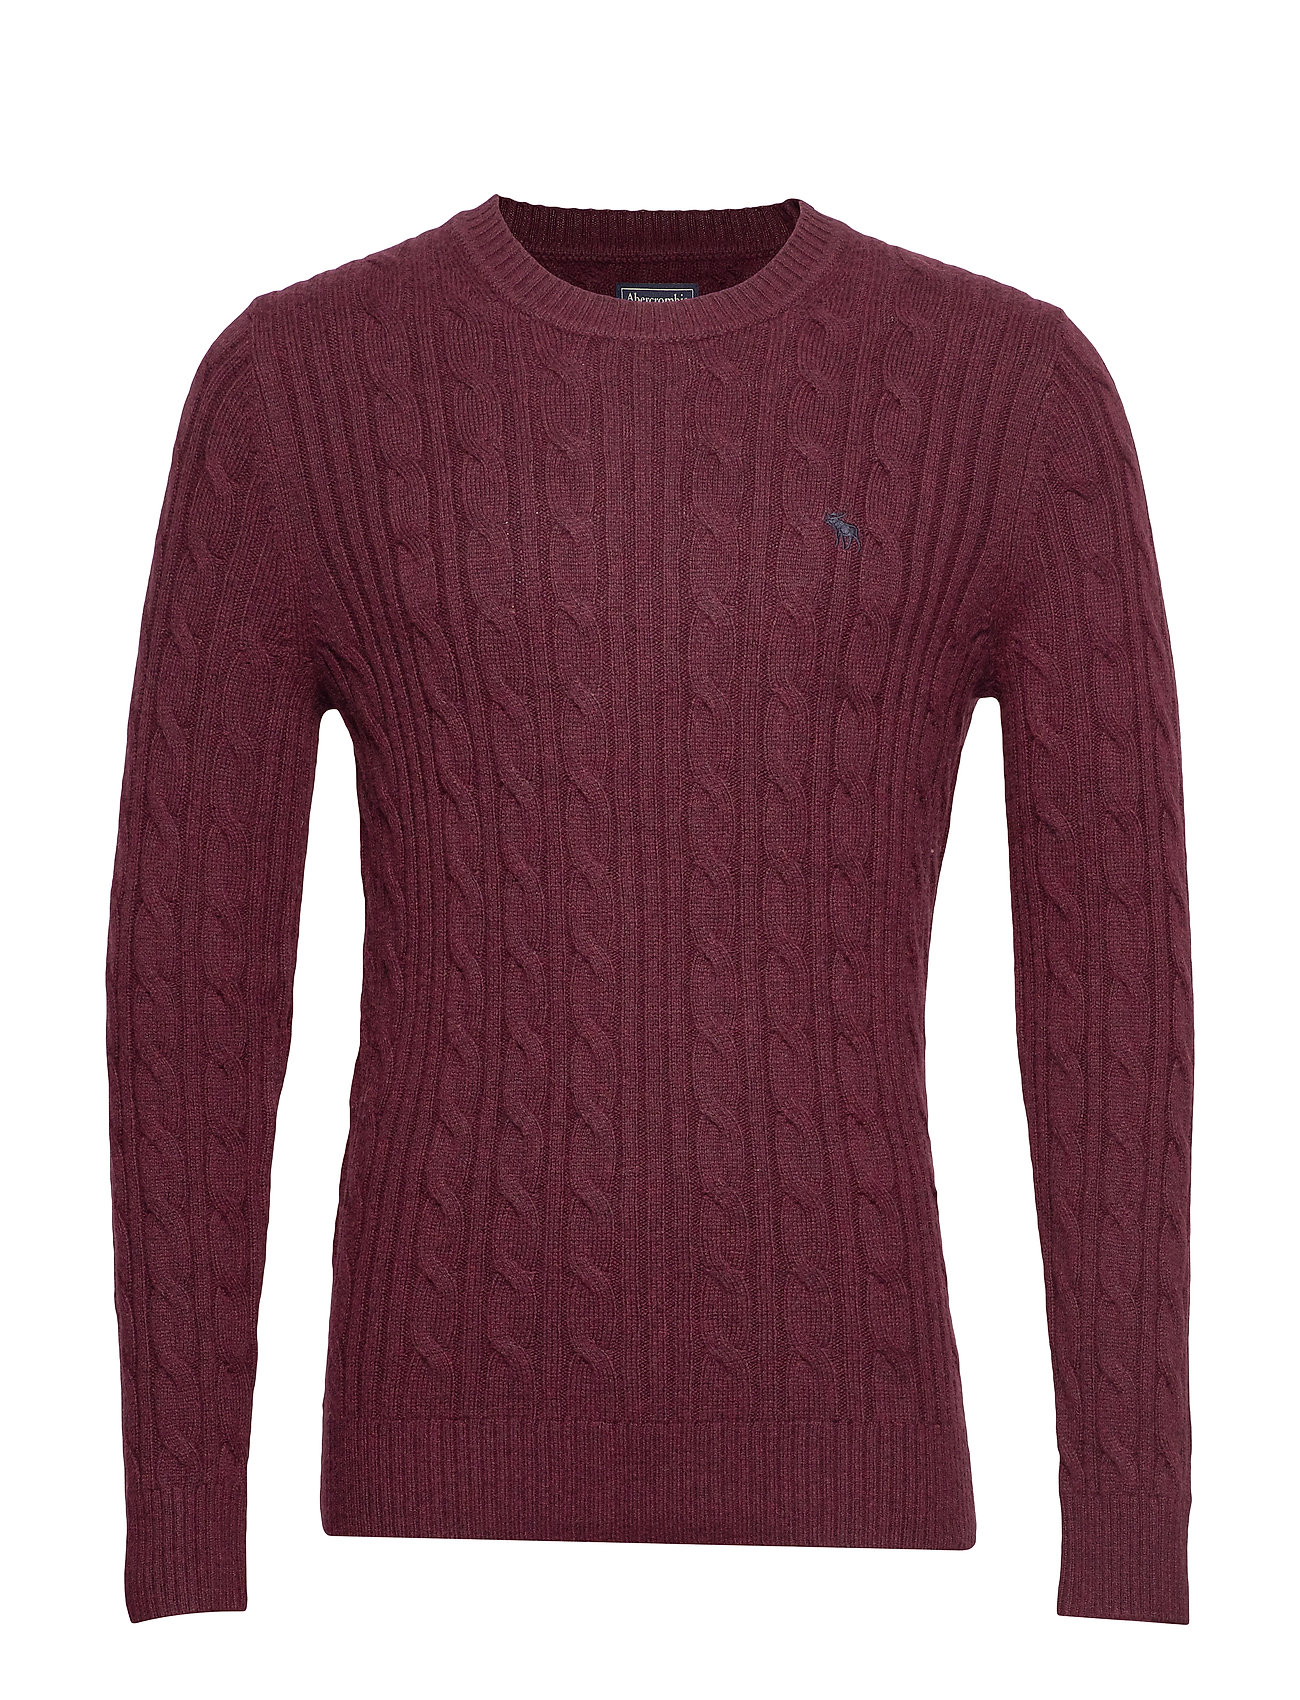 red abercrombie sweater